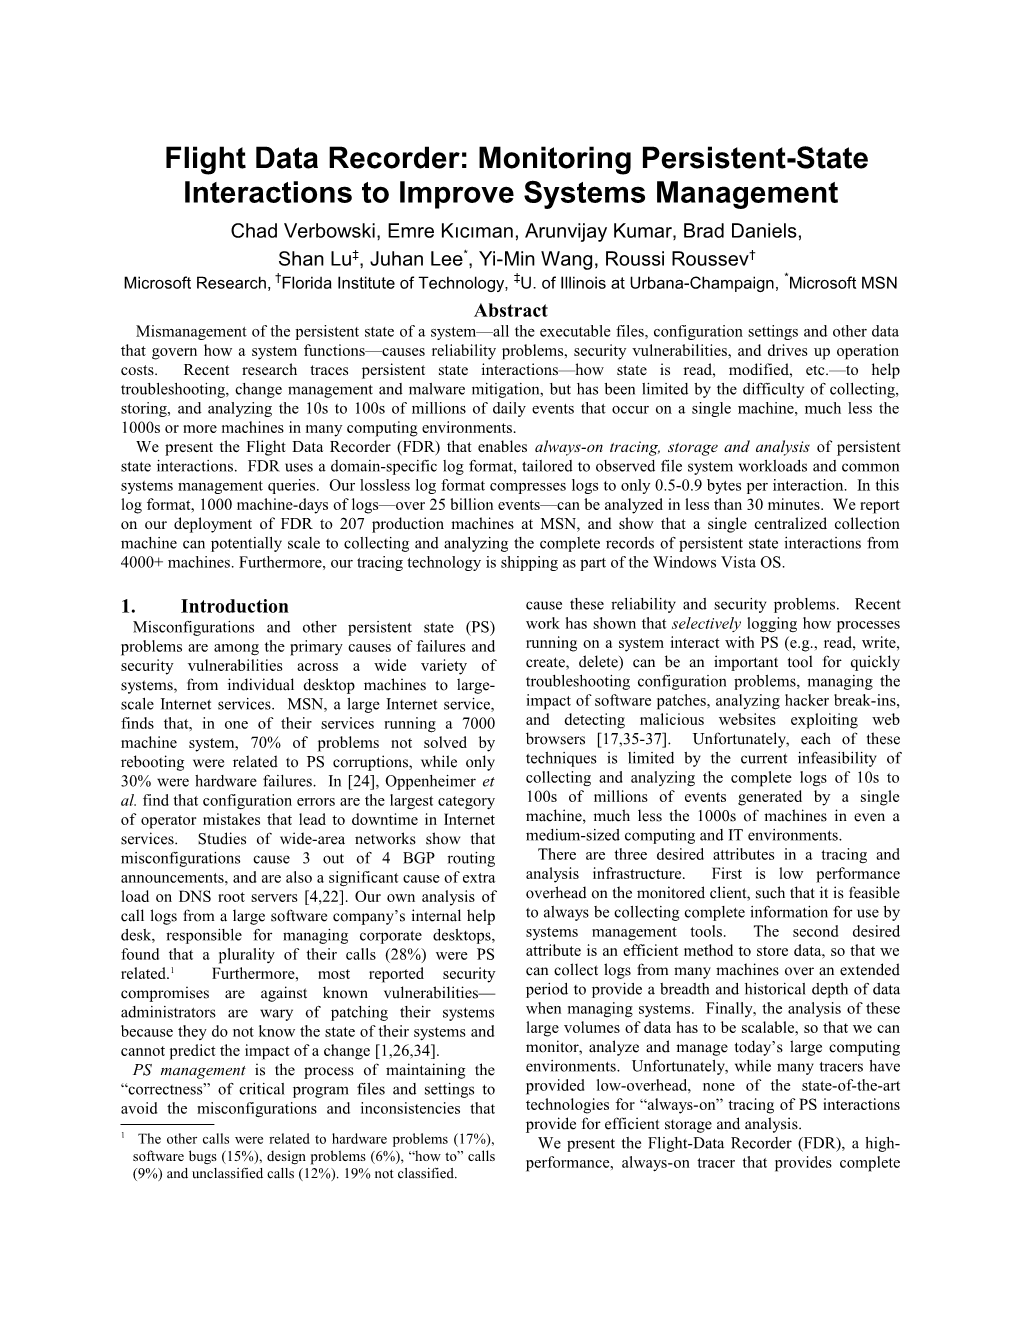 Flight Data Recorder: Monitoring Persistent-State Interactions to Improve Systems Management